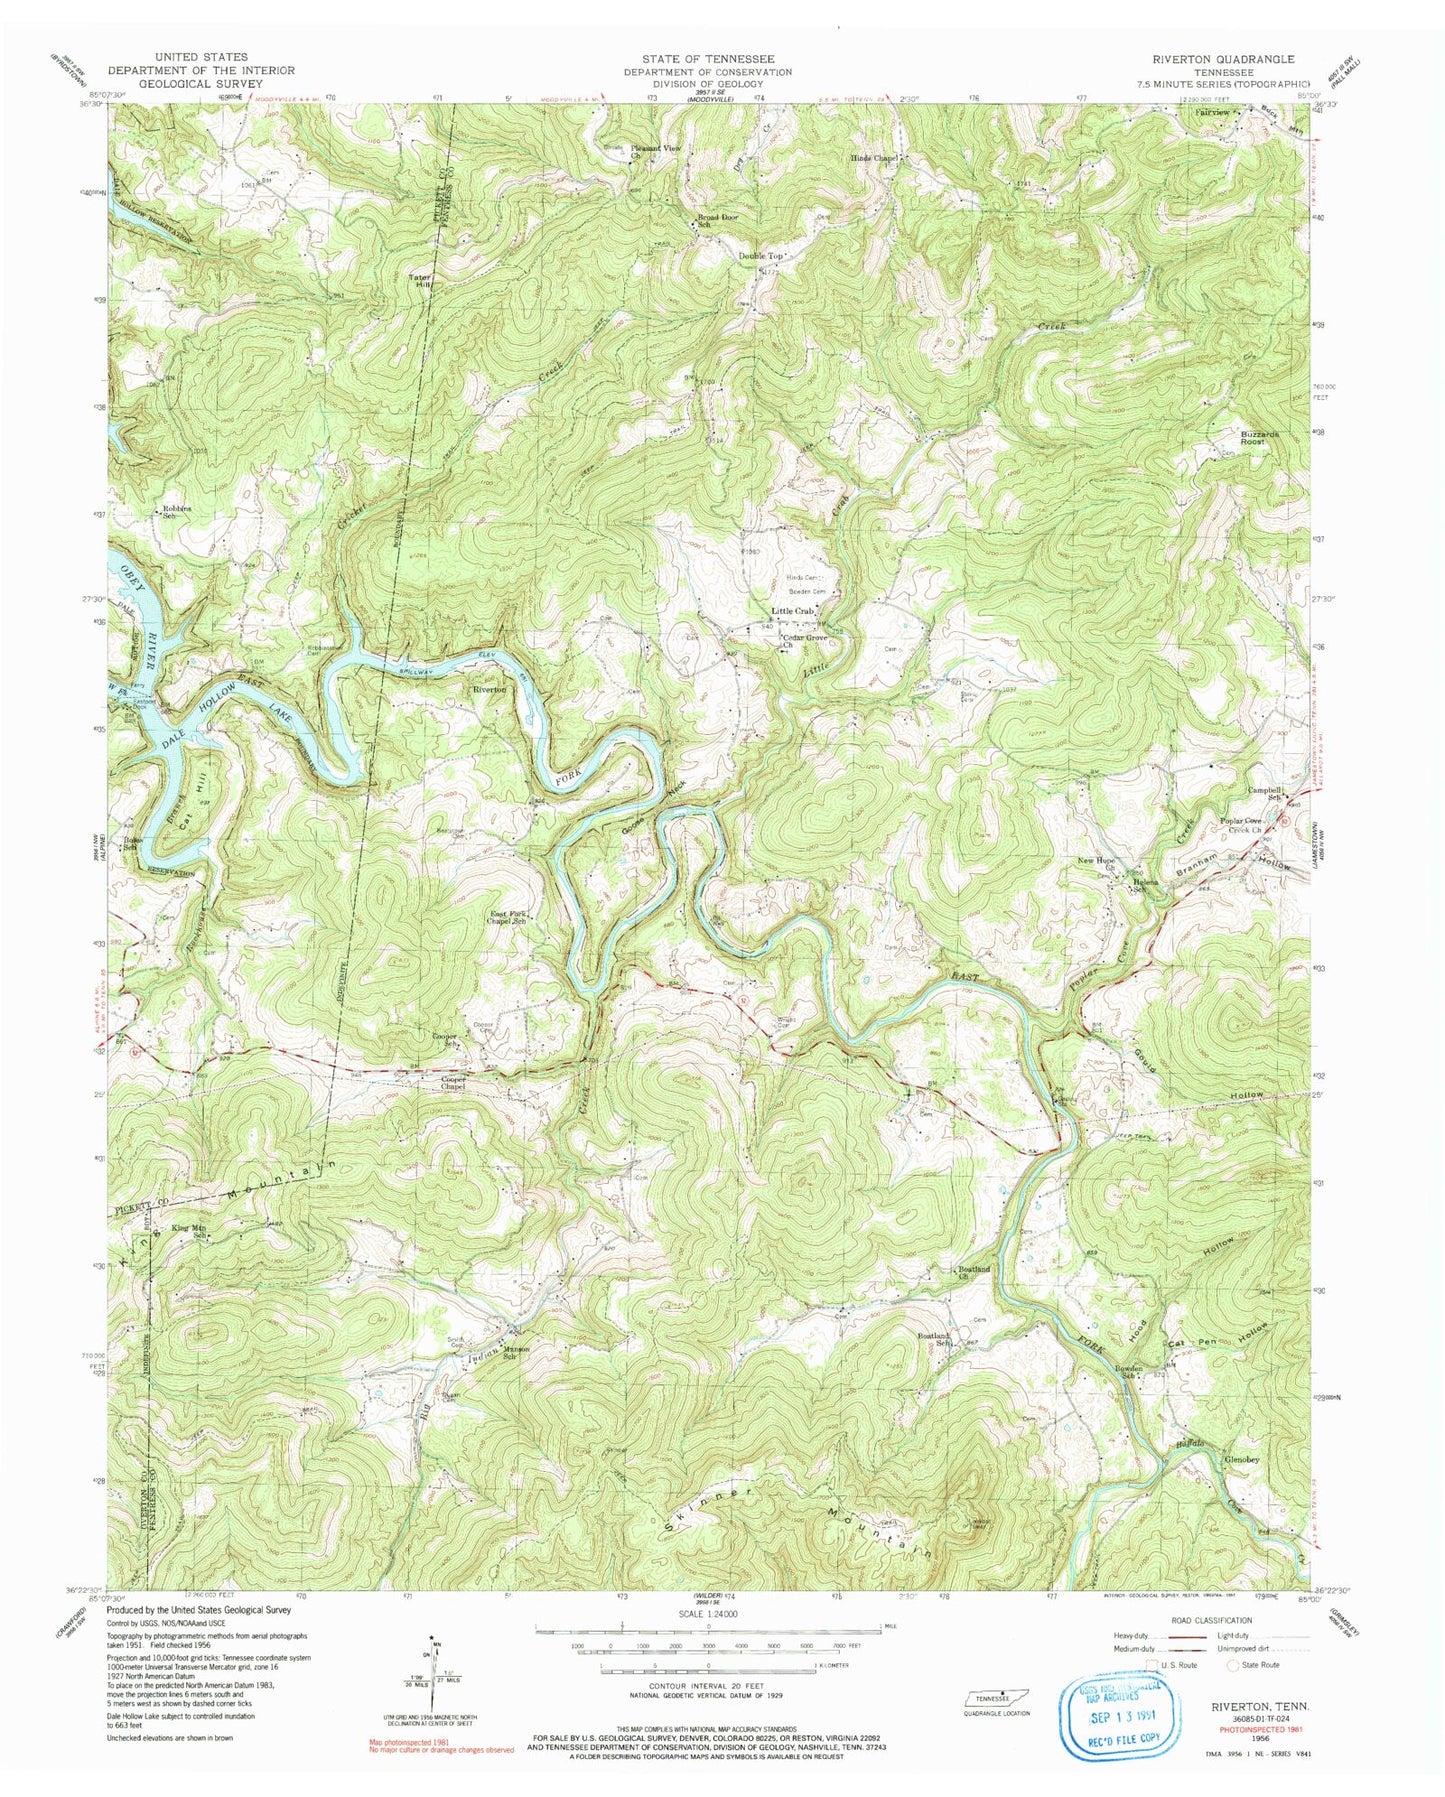 Classic USGS Riverton Tennessee 7.5'x7.5' Topo Map Image